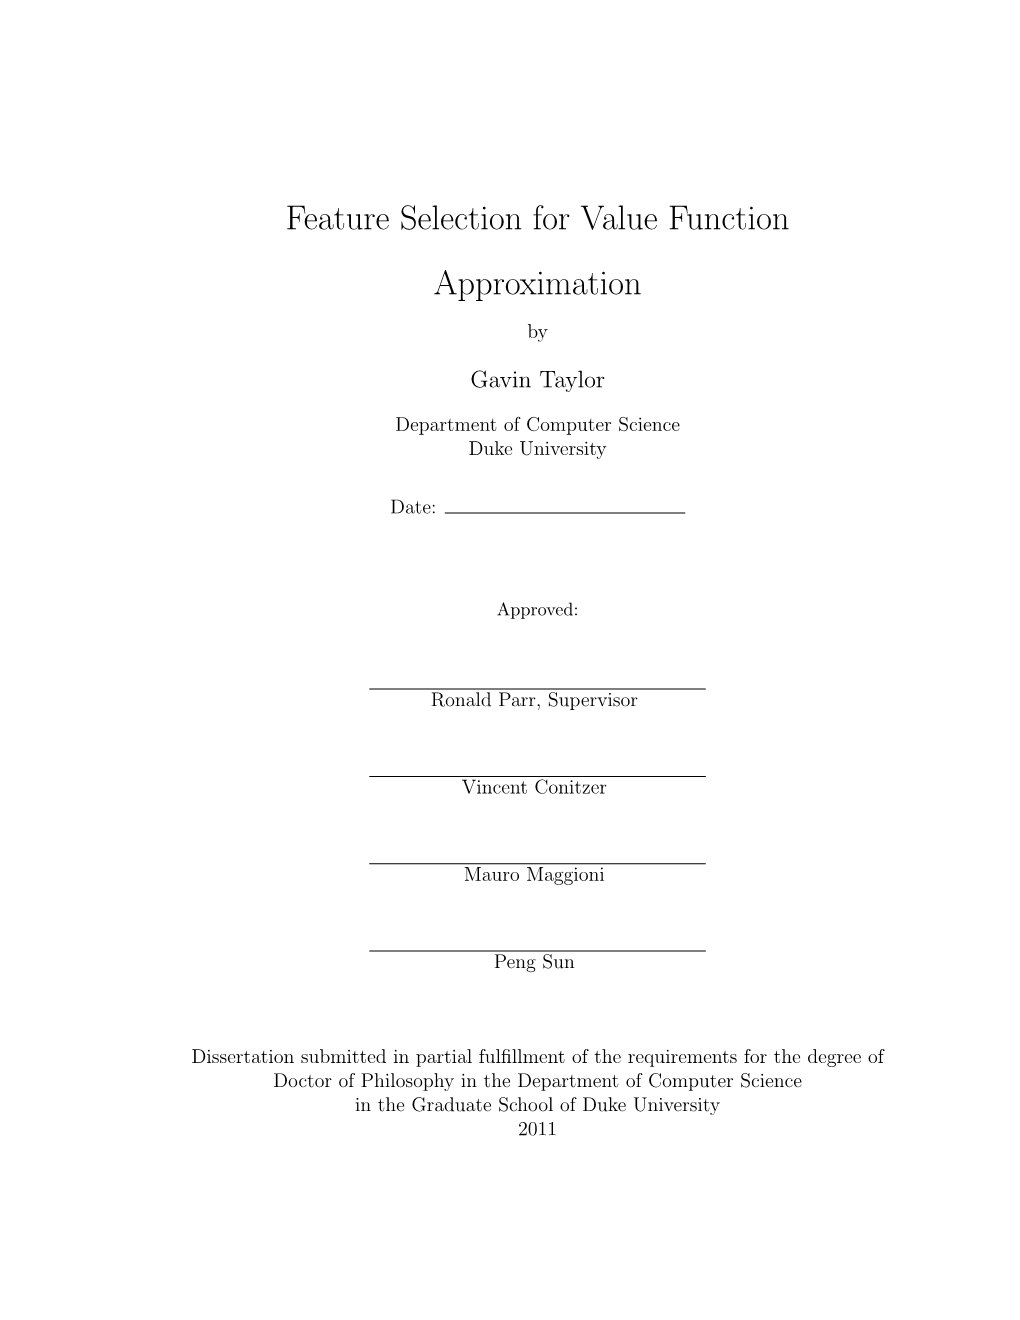 Feature Selection for Value Function Approximation